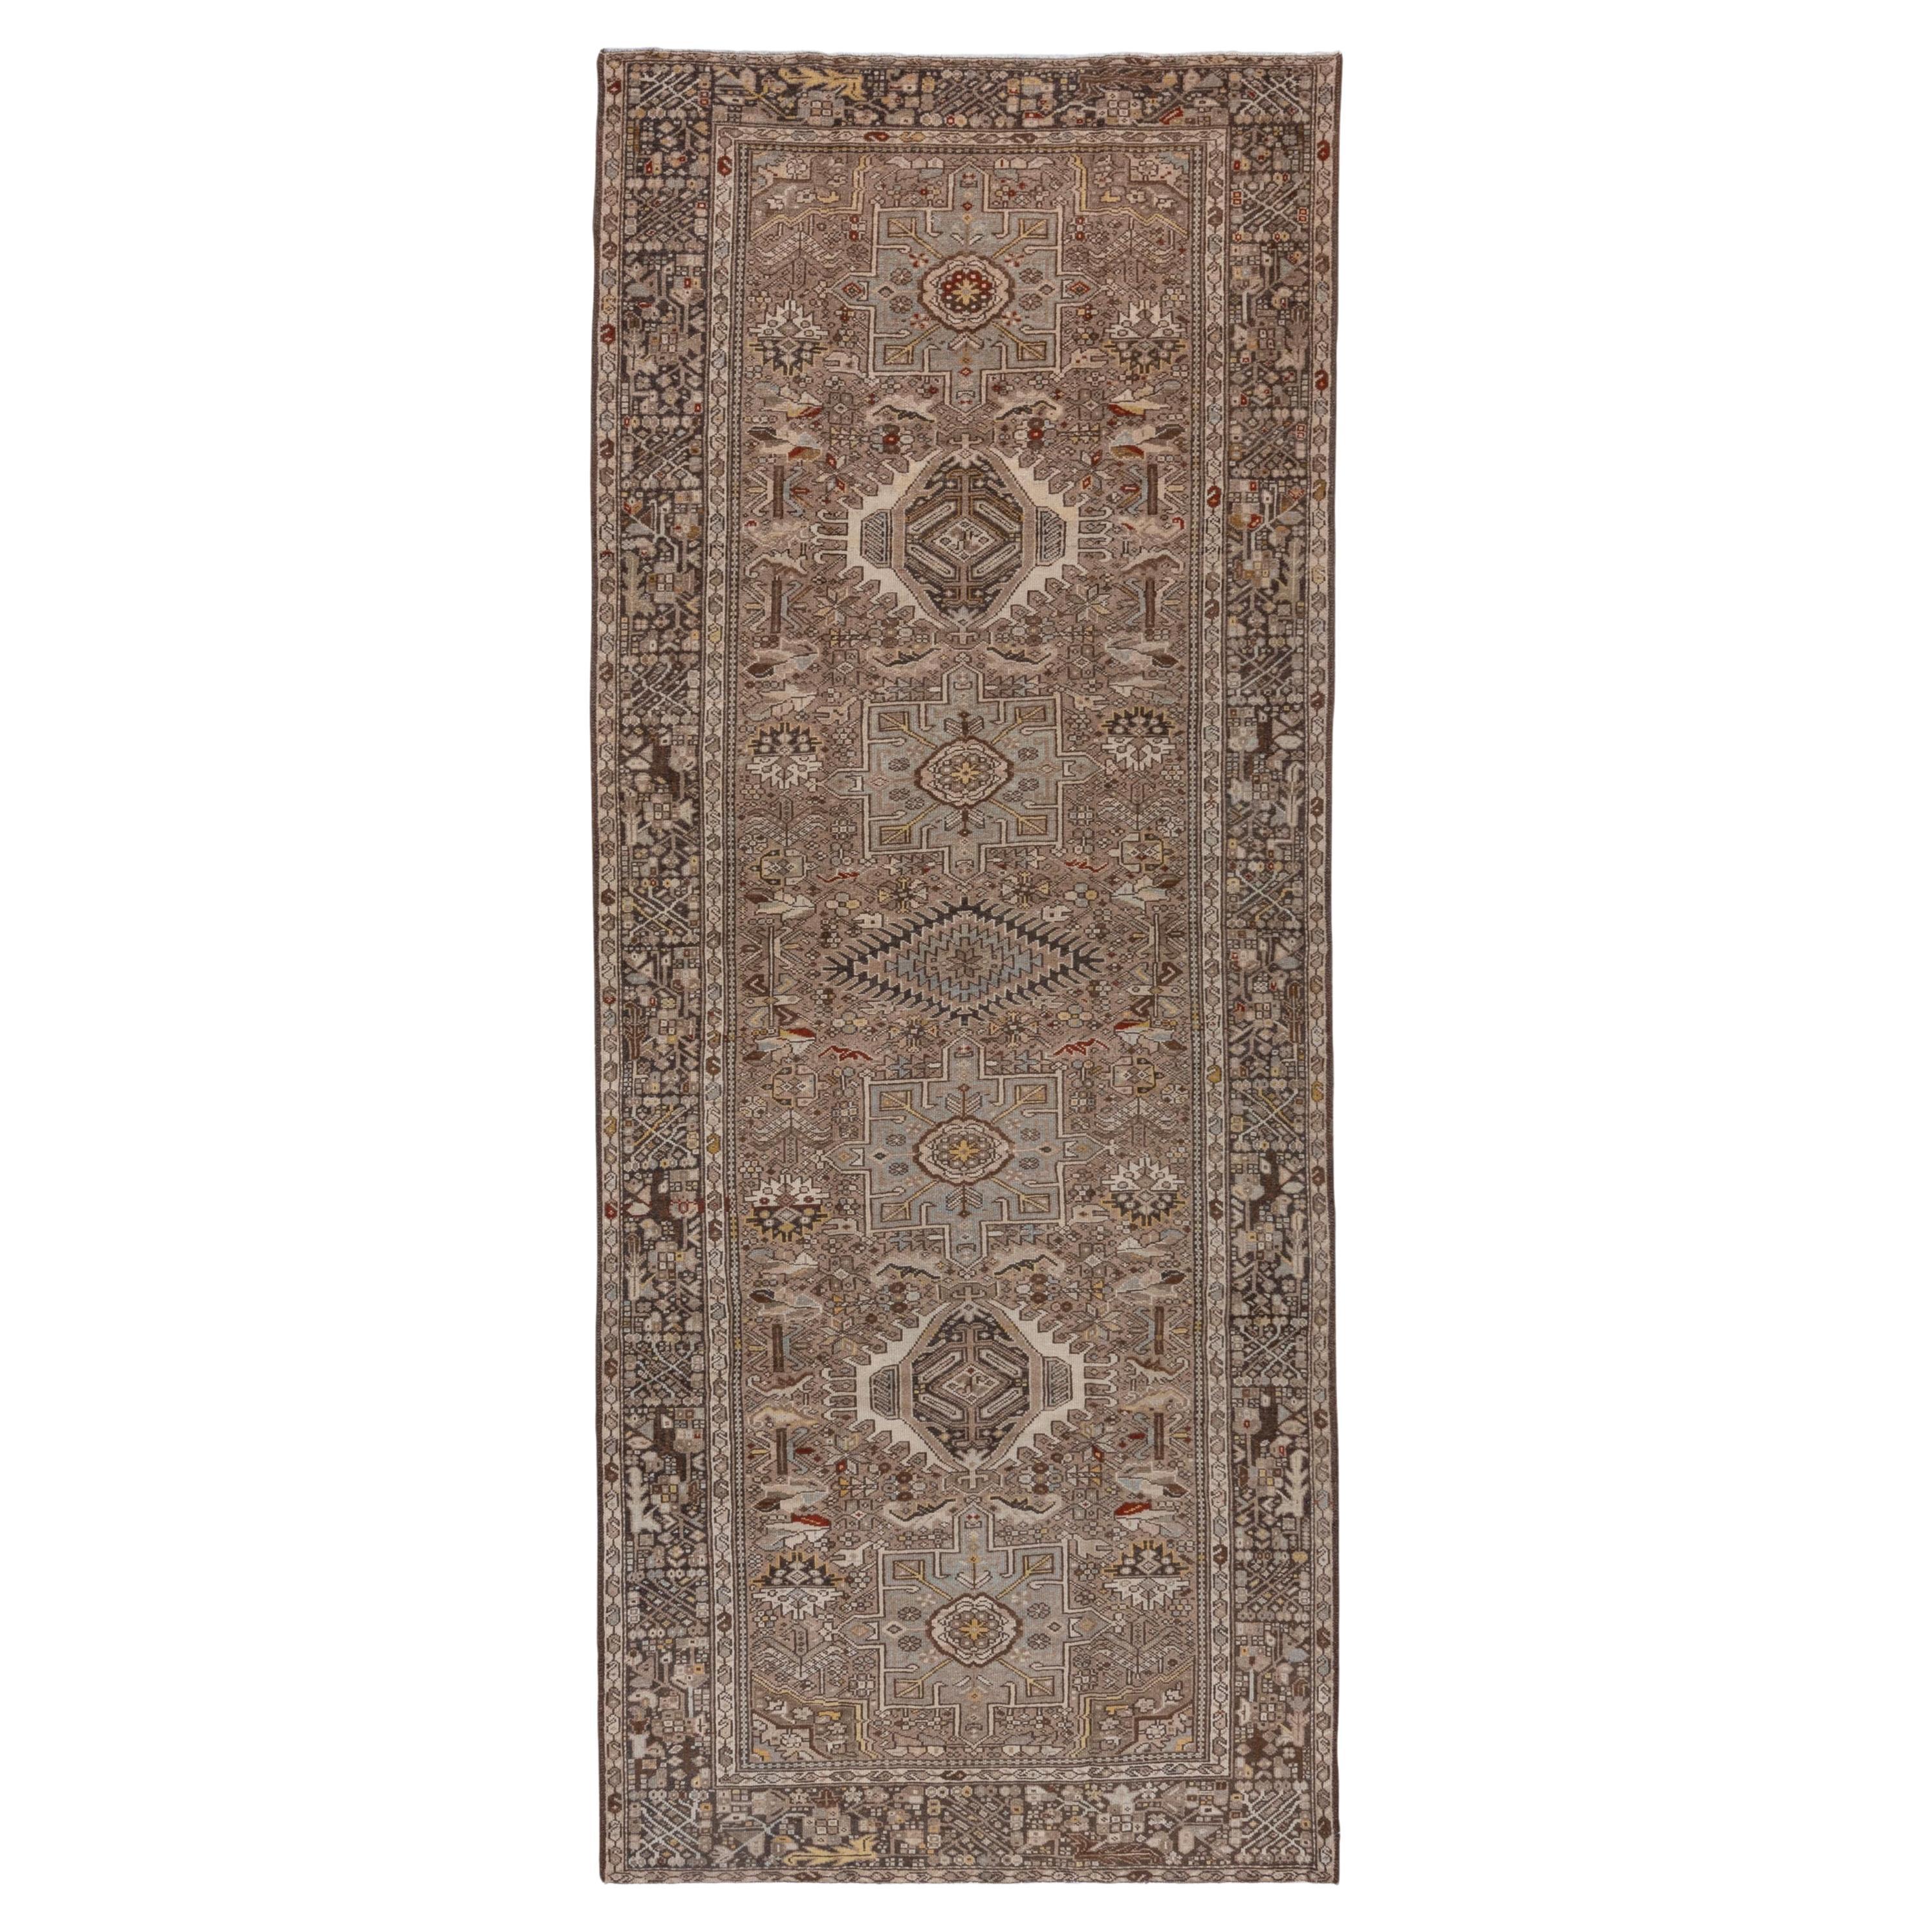 1930s Beautiful Antique Persian Karaje Gallery Rug with Minor Colorful Accents For Sale